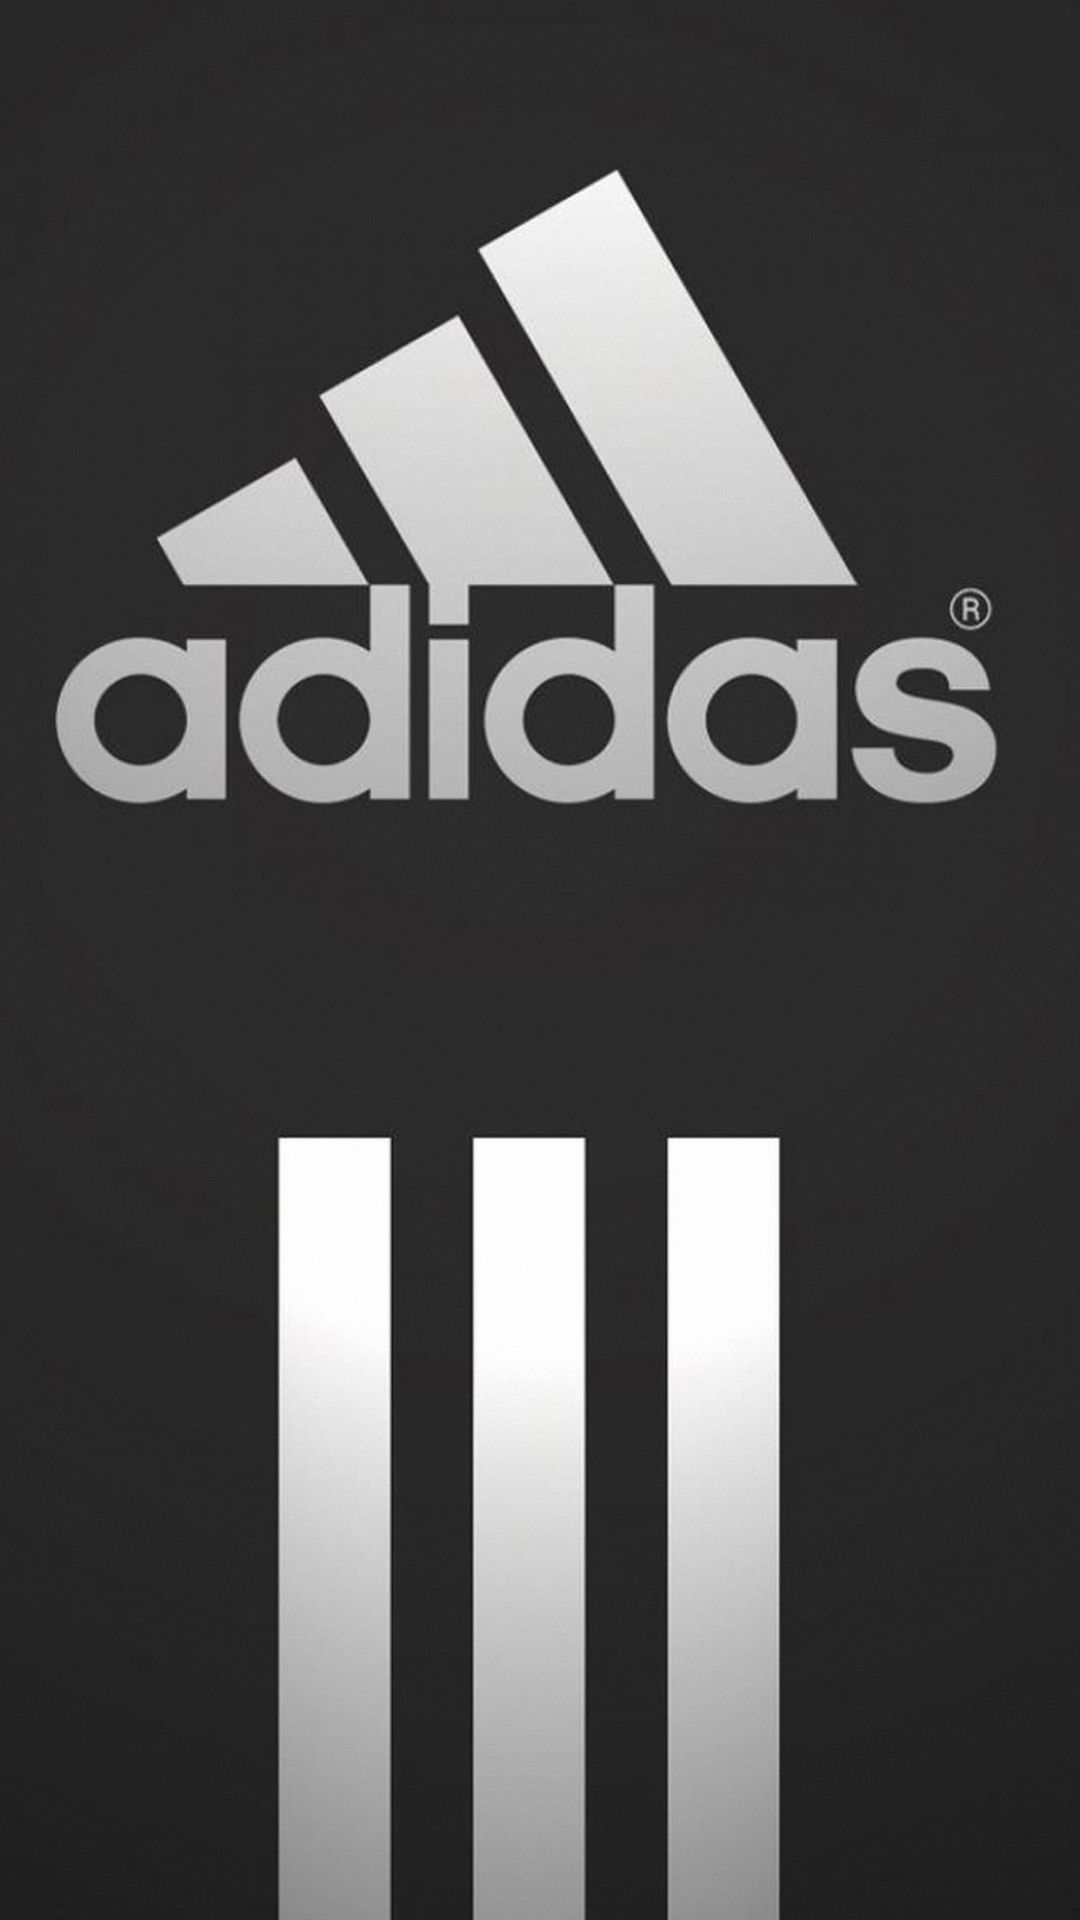 Adidas HD Android Wallpapers - Wallpaper Cave